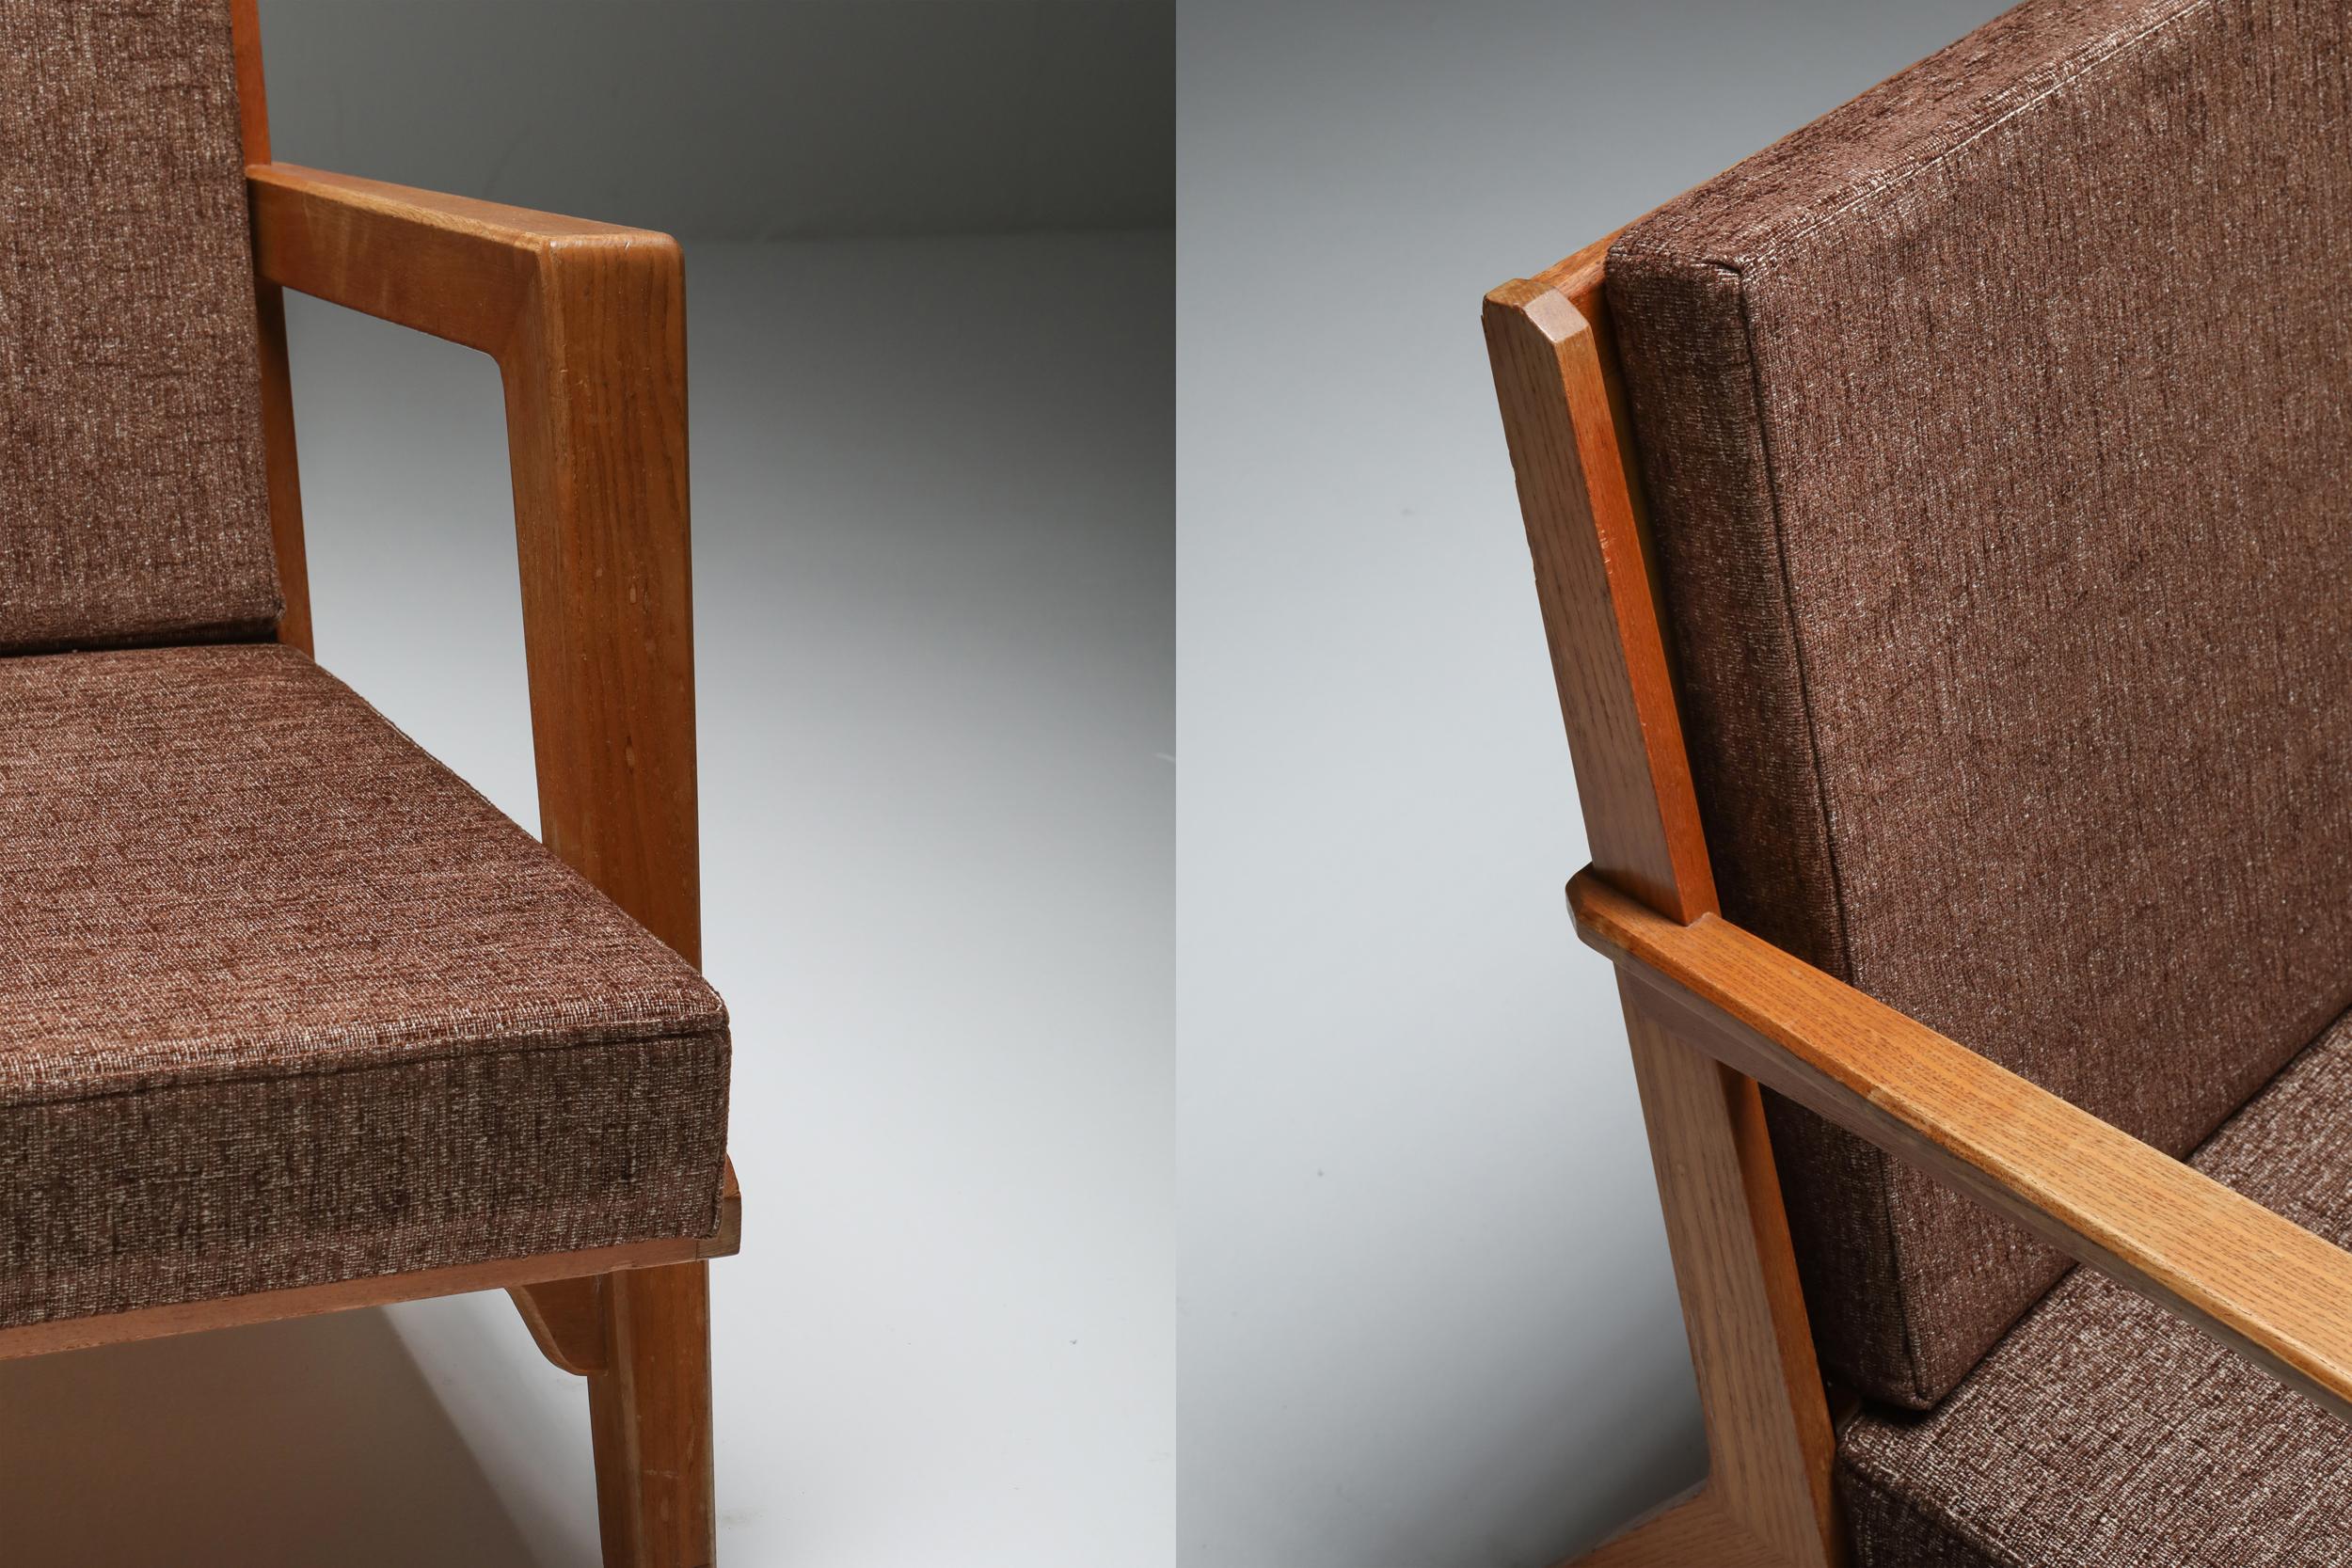 Upholstery Modernist Easy chairs by Elmar Berkovich, Netherlands, 1950s For Sale